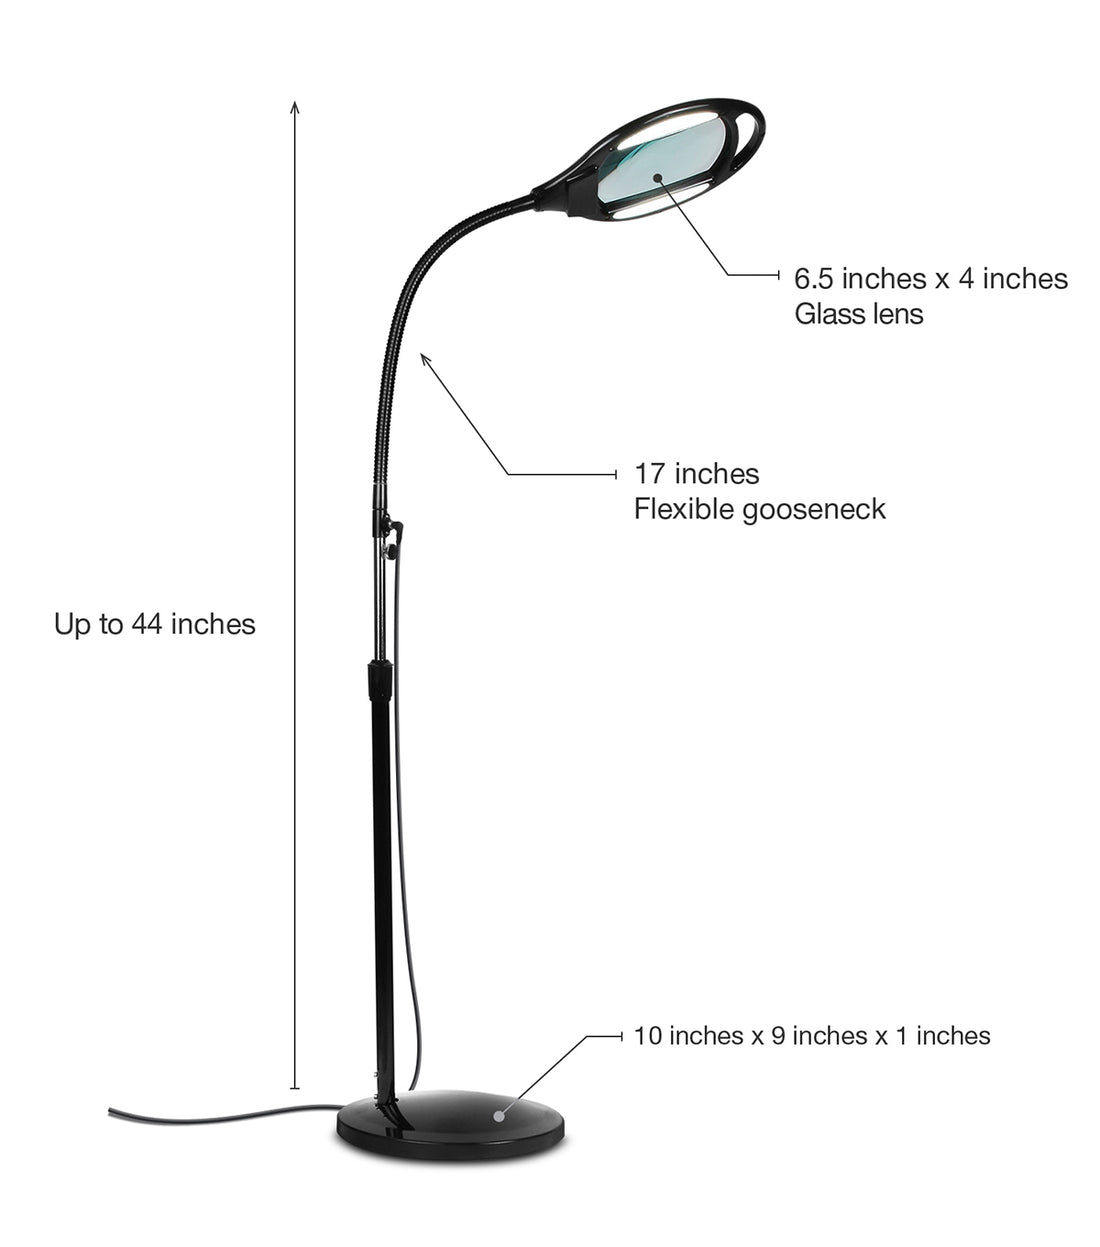 LightView PRO Magnifying Desk Lamp 2.25x Light Magnifier Adjustable  Magnifying Glass with Light for Crafts Reading Close Work - Black 